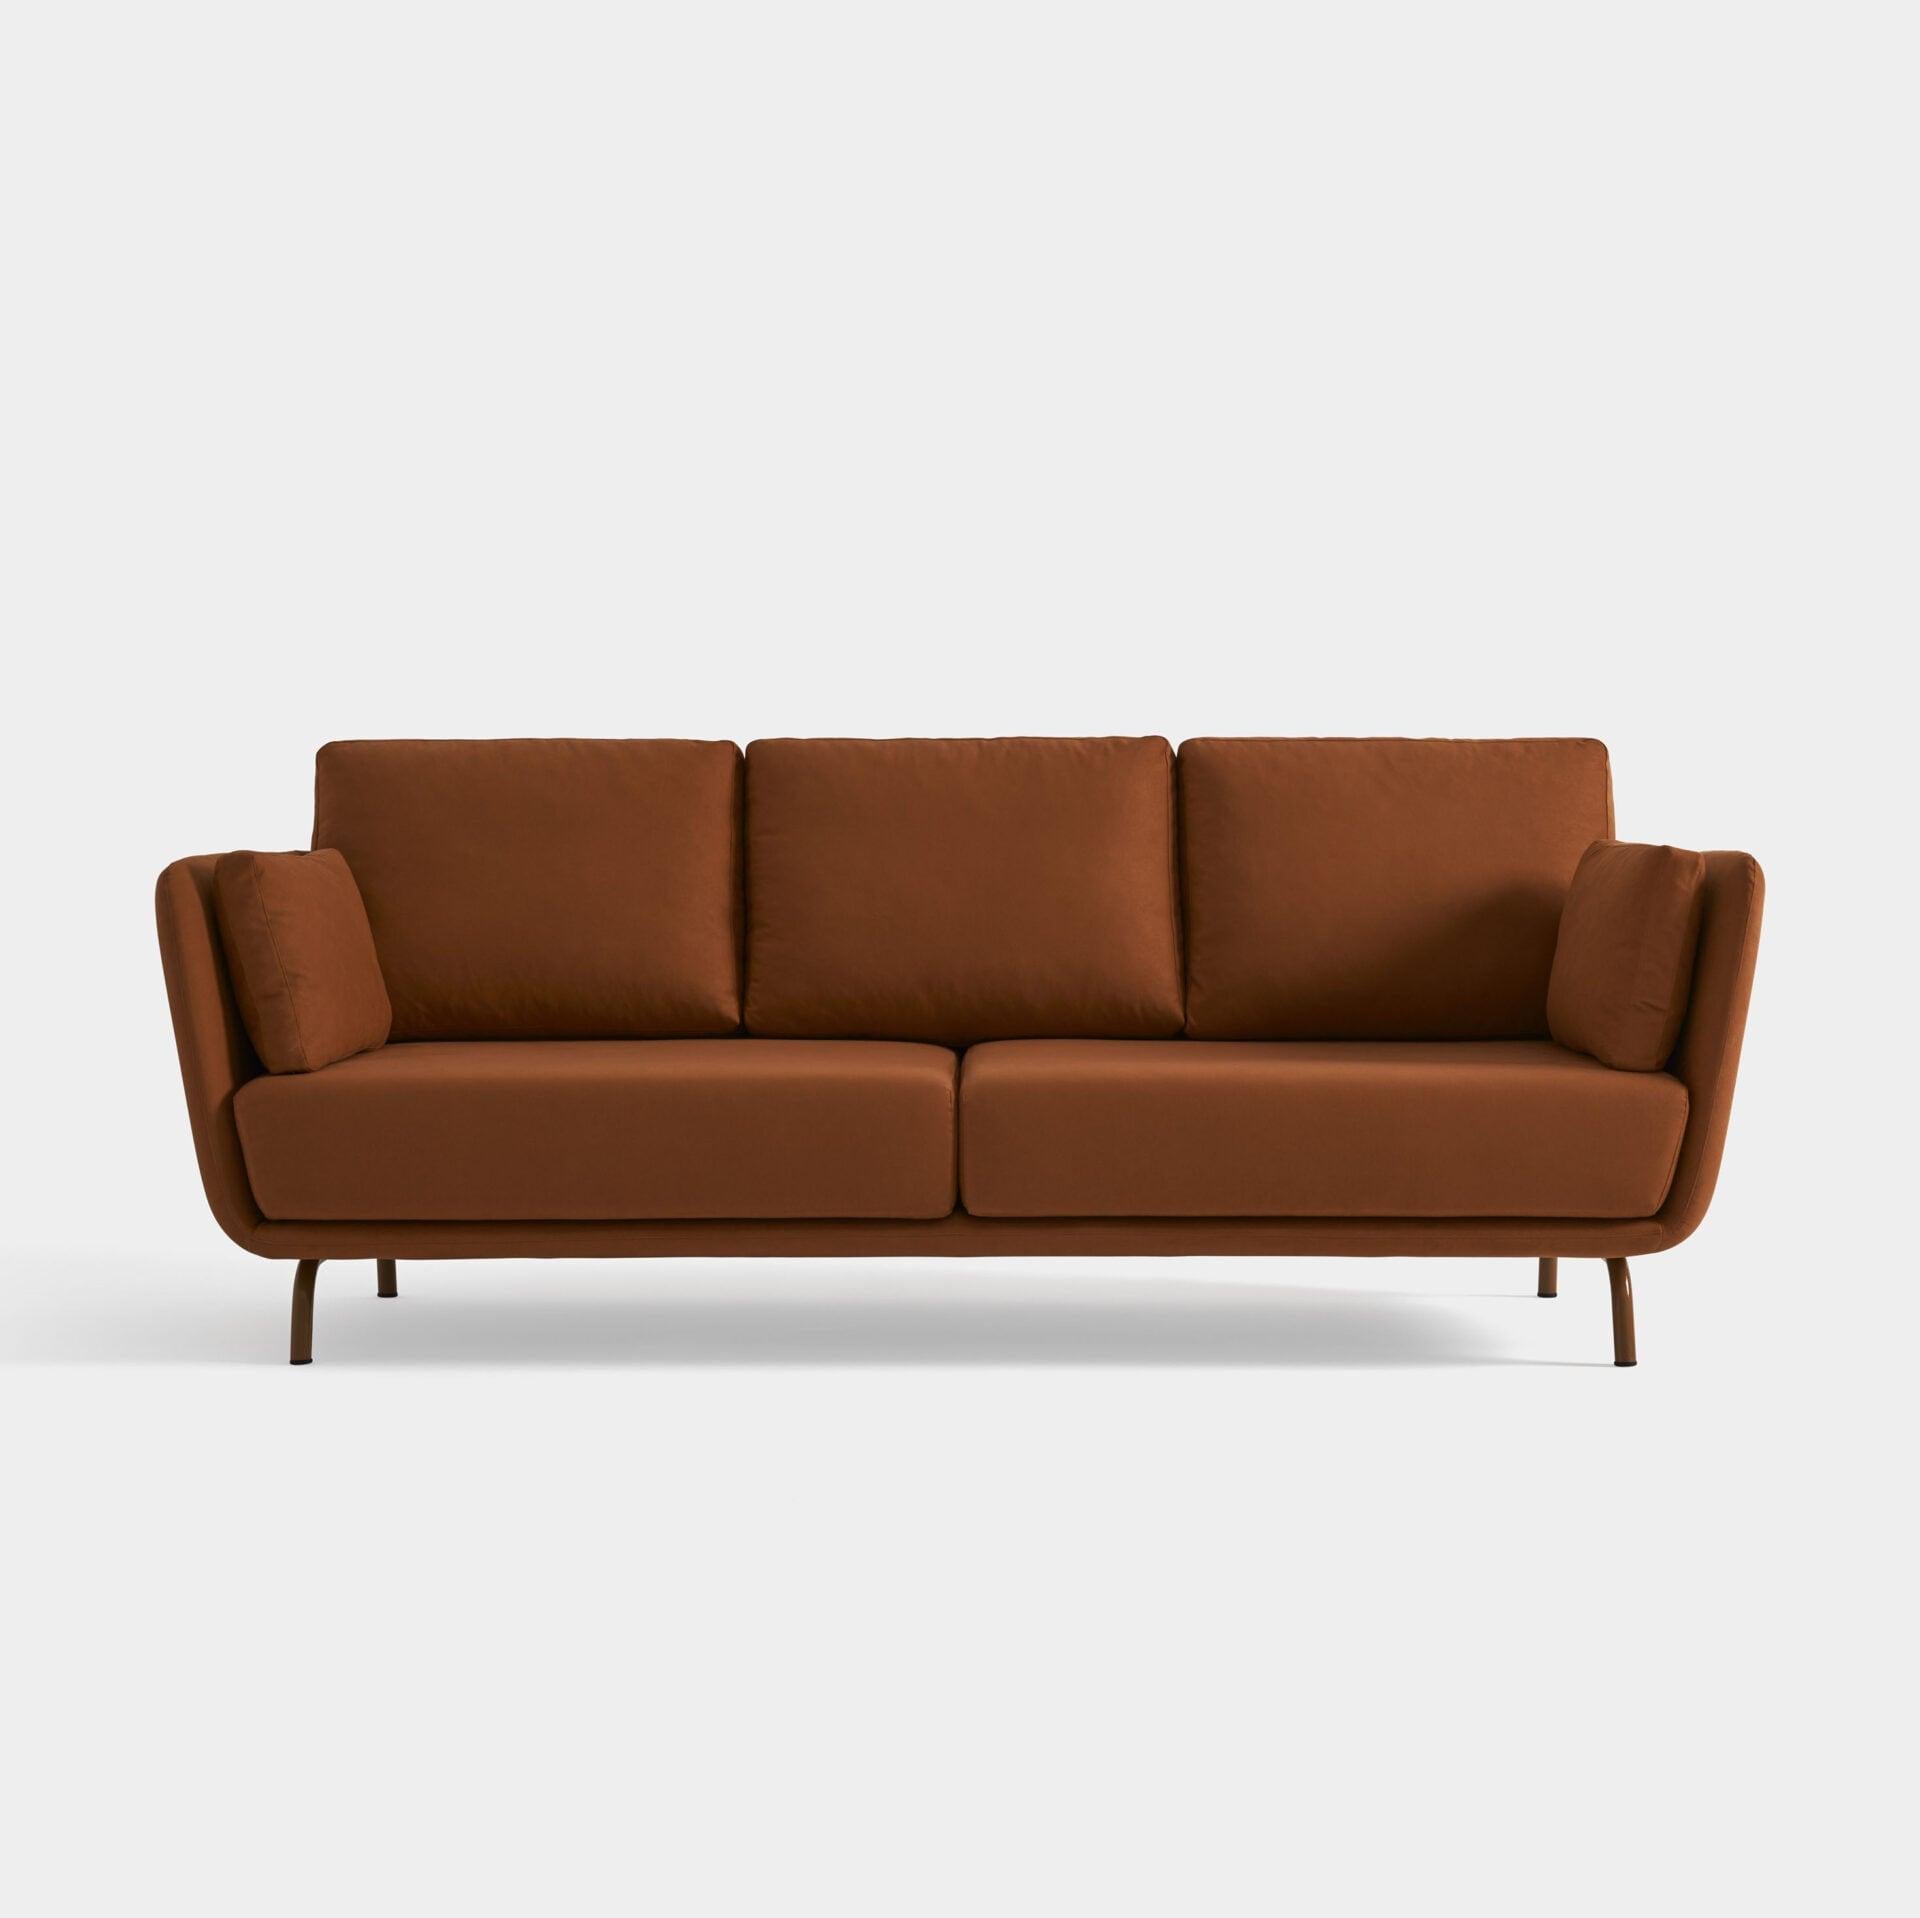 Swan sofa with metal legs by Pepe Albargues
Dimensions: W 196 x D 93 x H 92 cm
Materials: Metal, Fibre MDF, Foam CMHR 

Variations of materials are avaliable.
Swan is a collection made up of an armchair and a sofa inspired by the beauty and